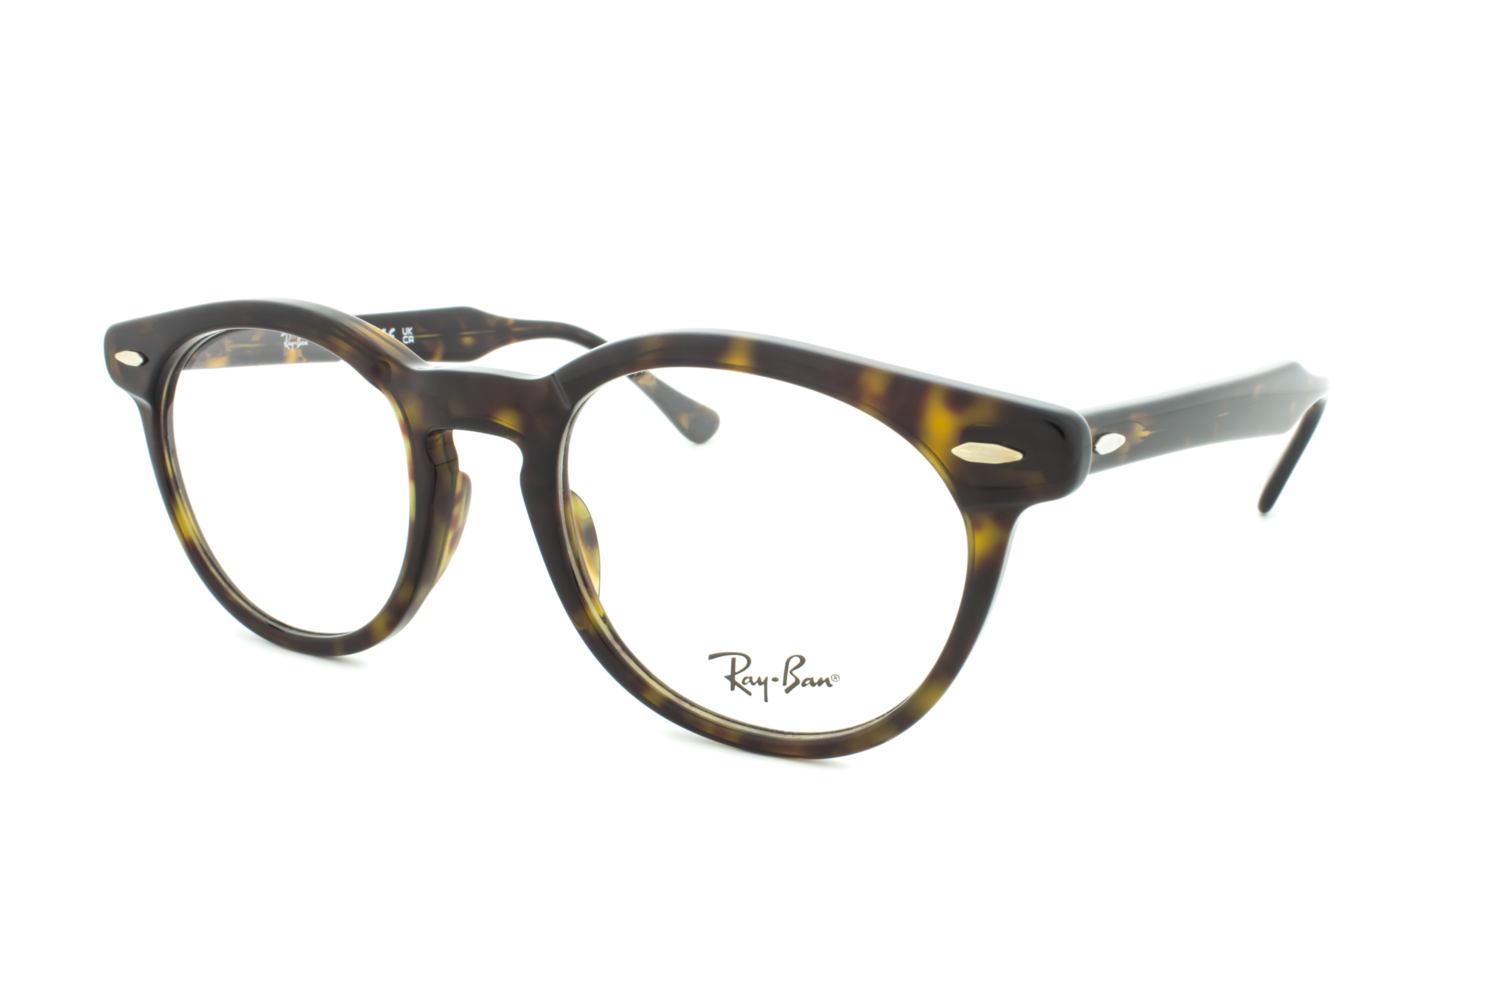 Ray-Ban RB 5598 2012 3450.00 MDL Glasses - AstroOptica